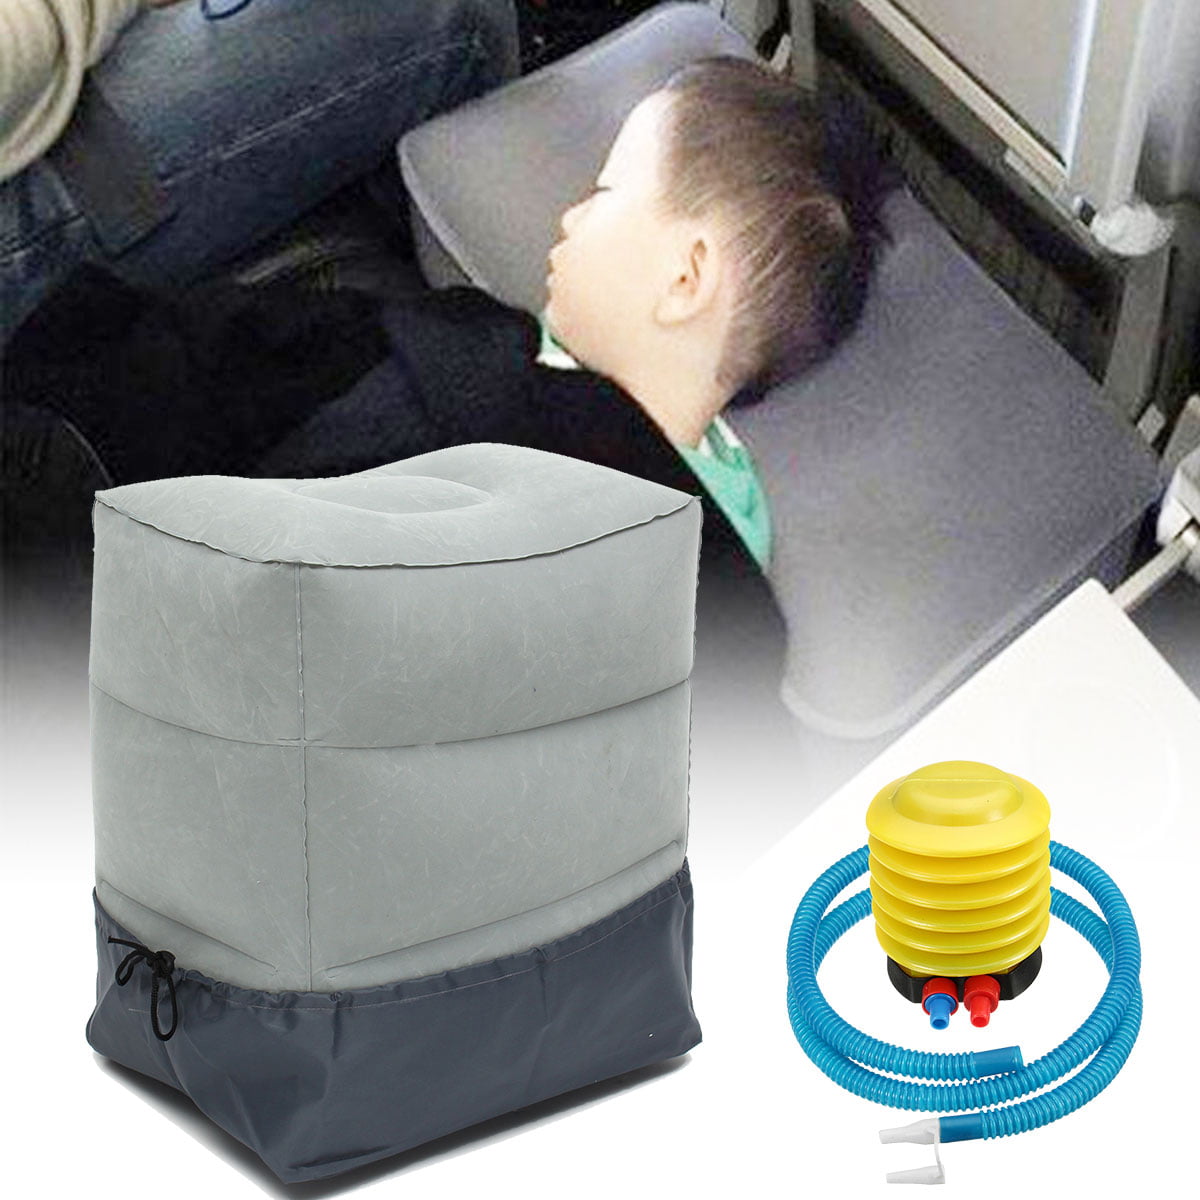 1st class kid travel pillow inflatable footrest